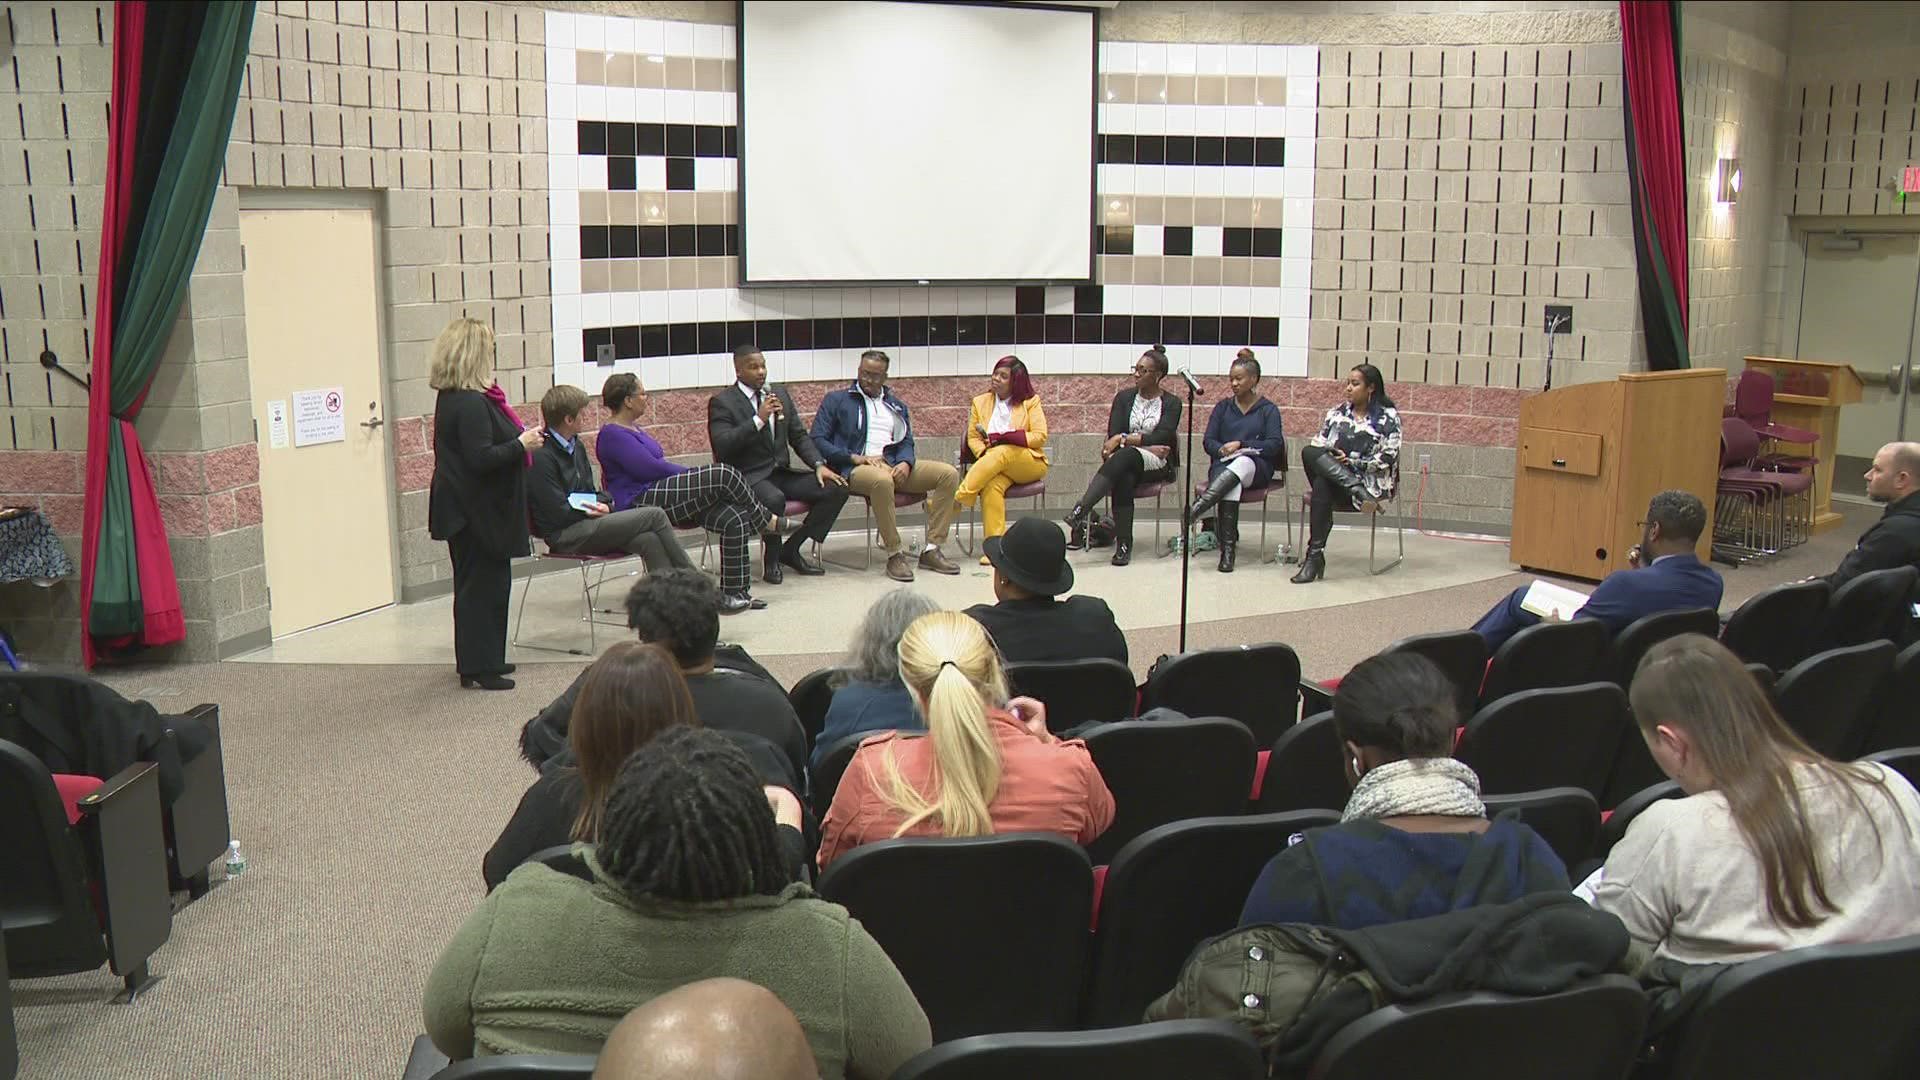 Community leaders at the event say lack of such discussions cause can cause division and misconceptions among people.